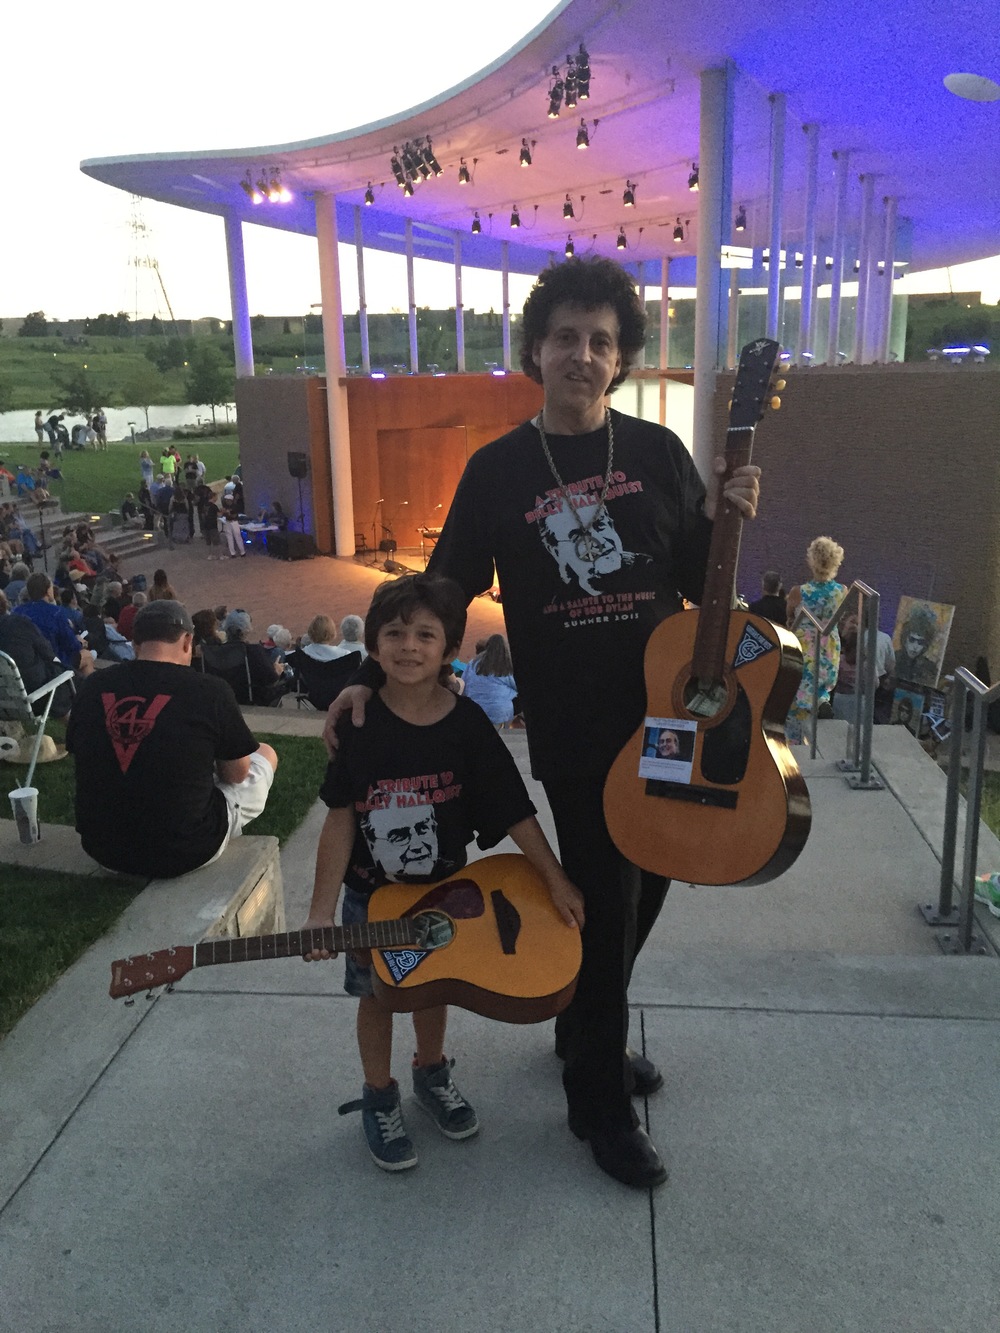  Abe Percansky-Segal and Magic Marc / Town Green Amphitheatre / Maple Grove, Minnesota / July 29th, 2015 / Photo by Lisa Goldwater 